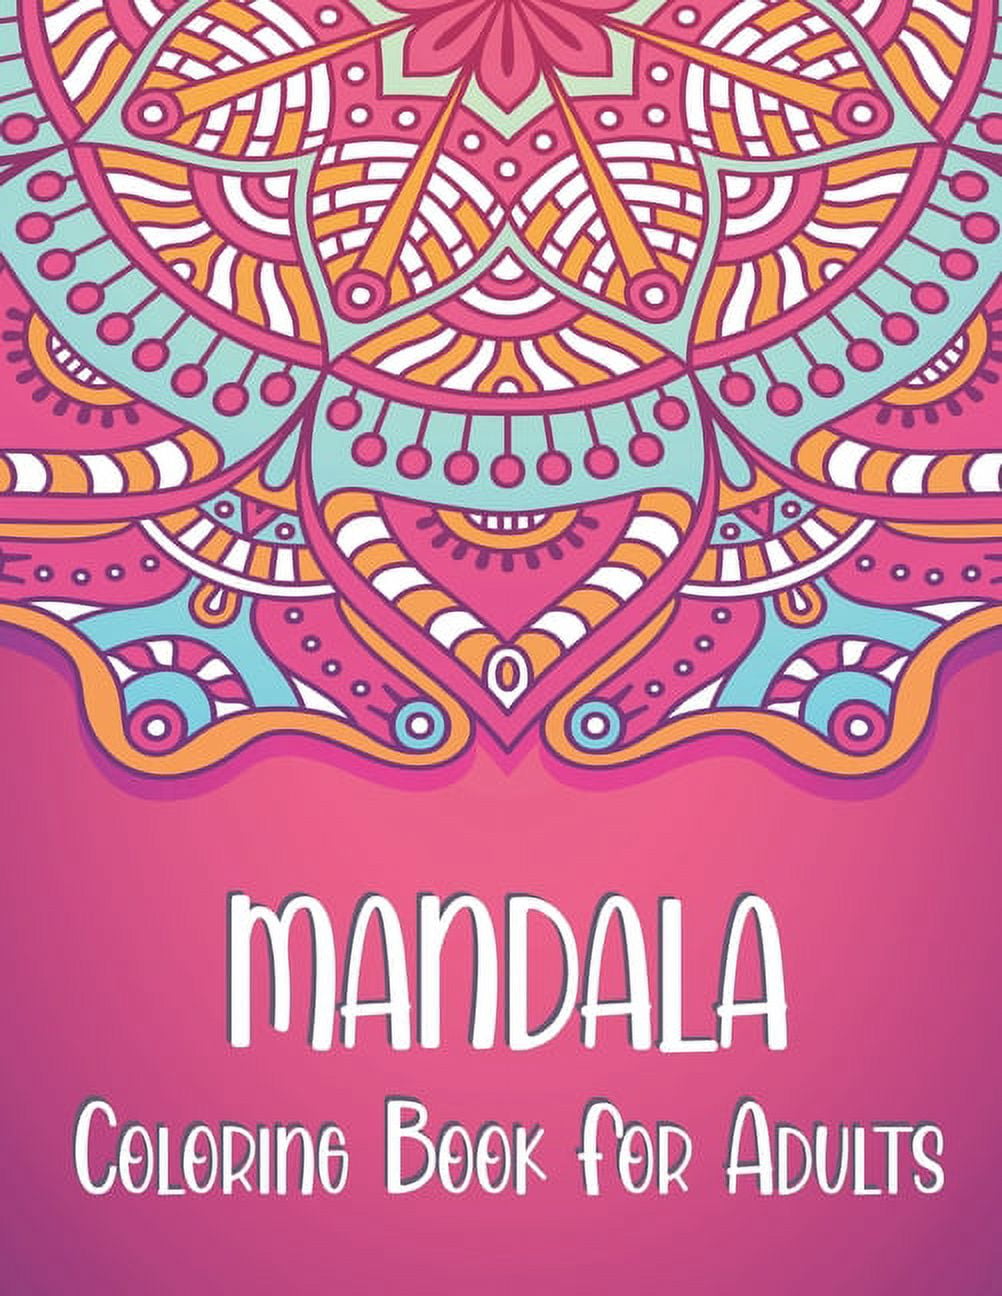 Advanced Coloring Book Set for Adults - 4 Pc Relaxation Coloring Book  Bundle for Women and Men Featuring Inspirational Quotes, Mandalas,  Meditative